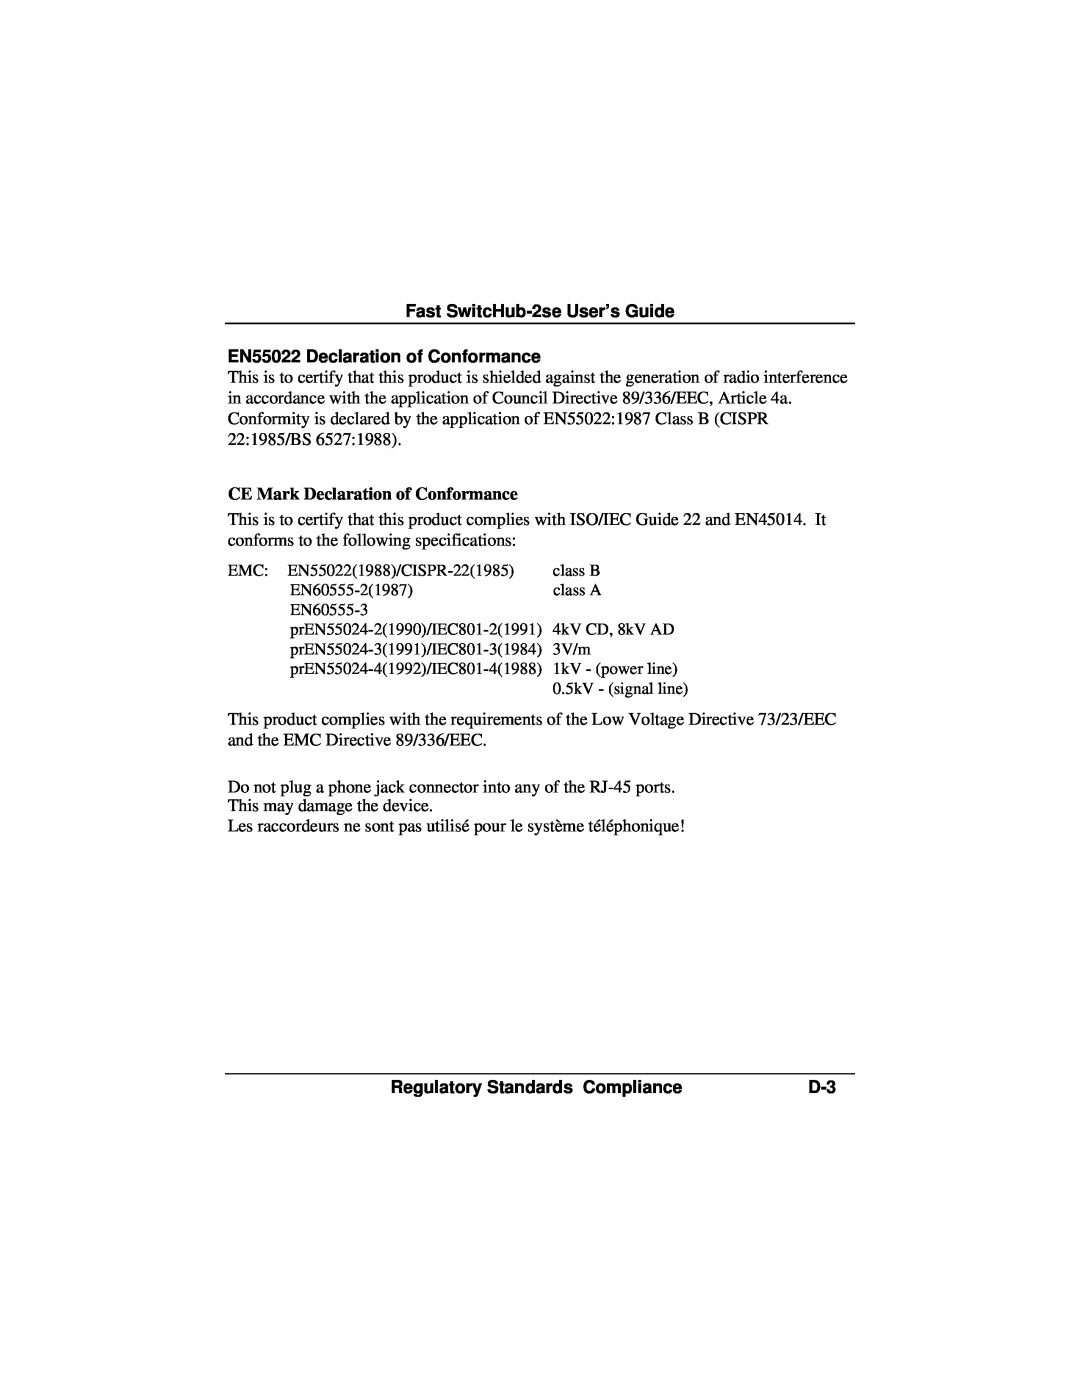 Accton Technology ES3002-TF manual Fast SwitcHub-2se User’s Guide EN55022 Declaration of Conformance 